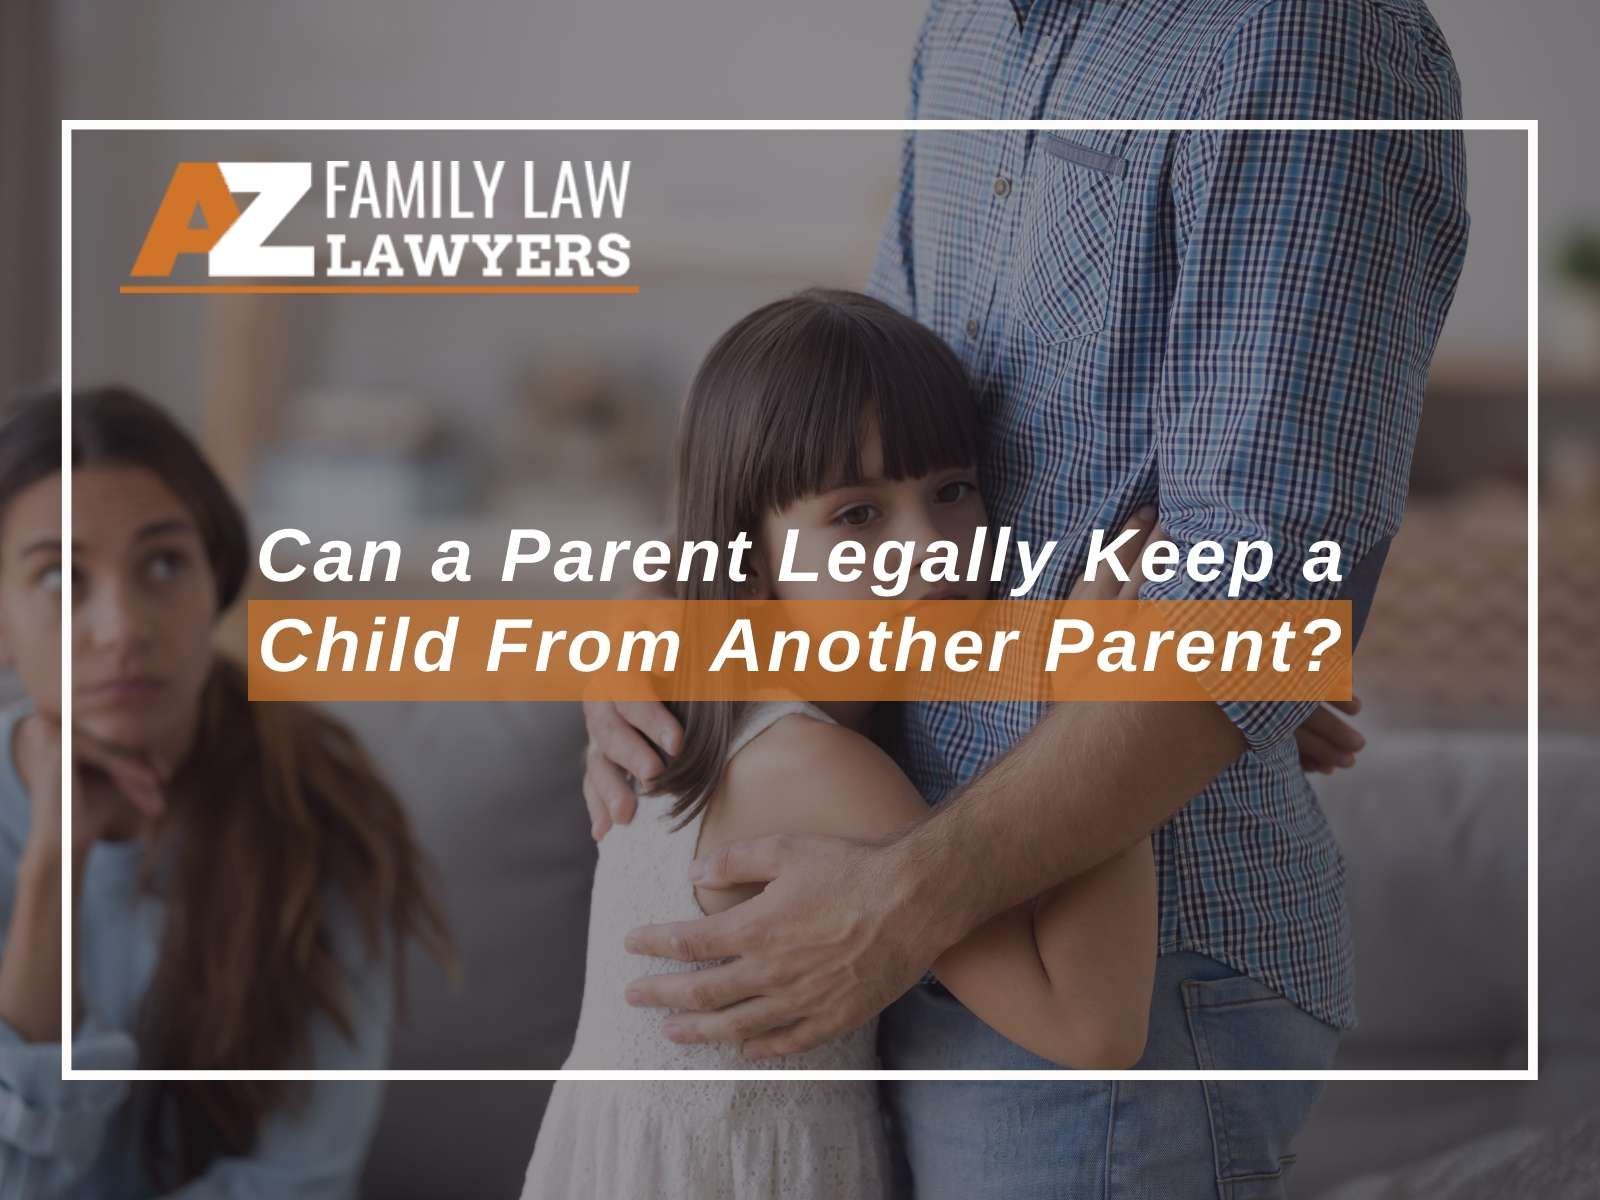 Can a Parent Legally Keep a Child From Another Parent?